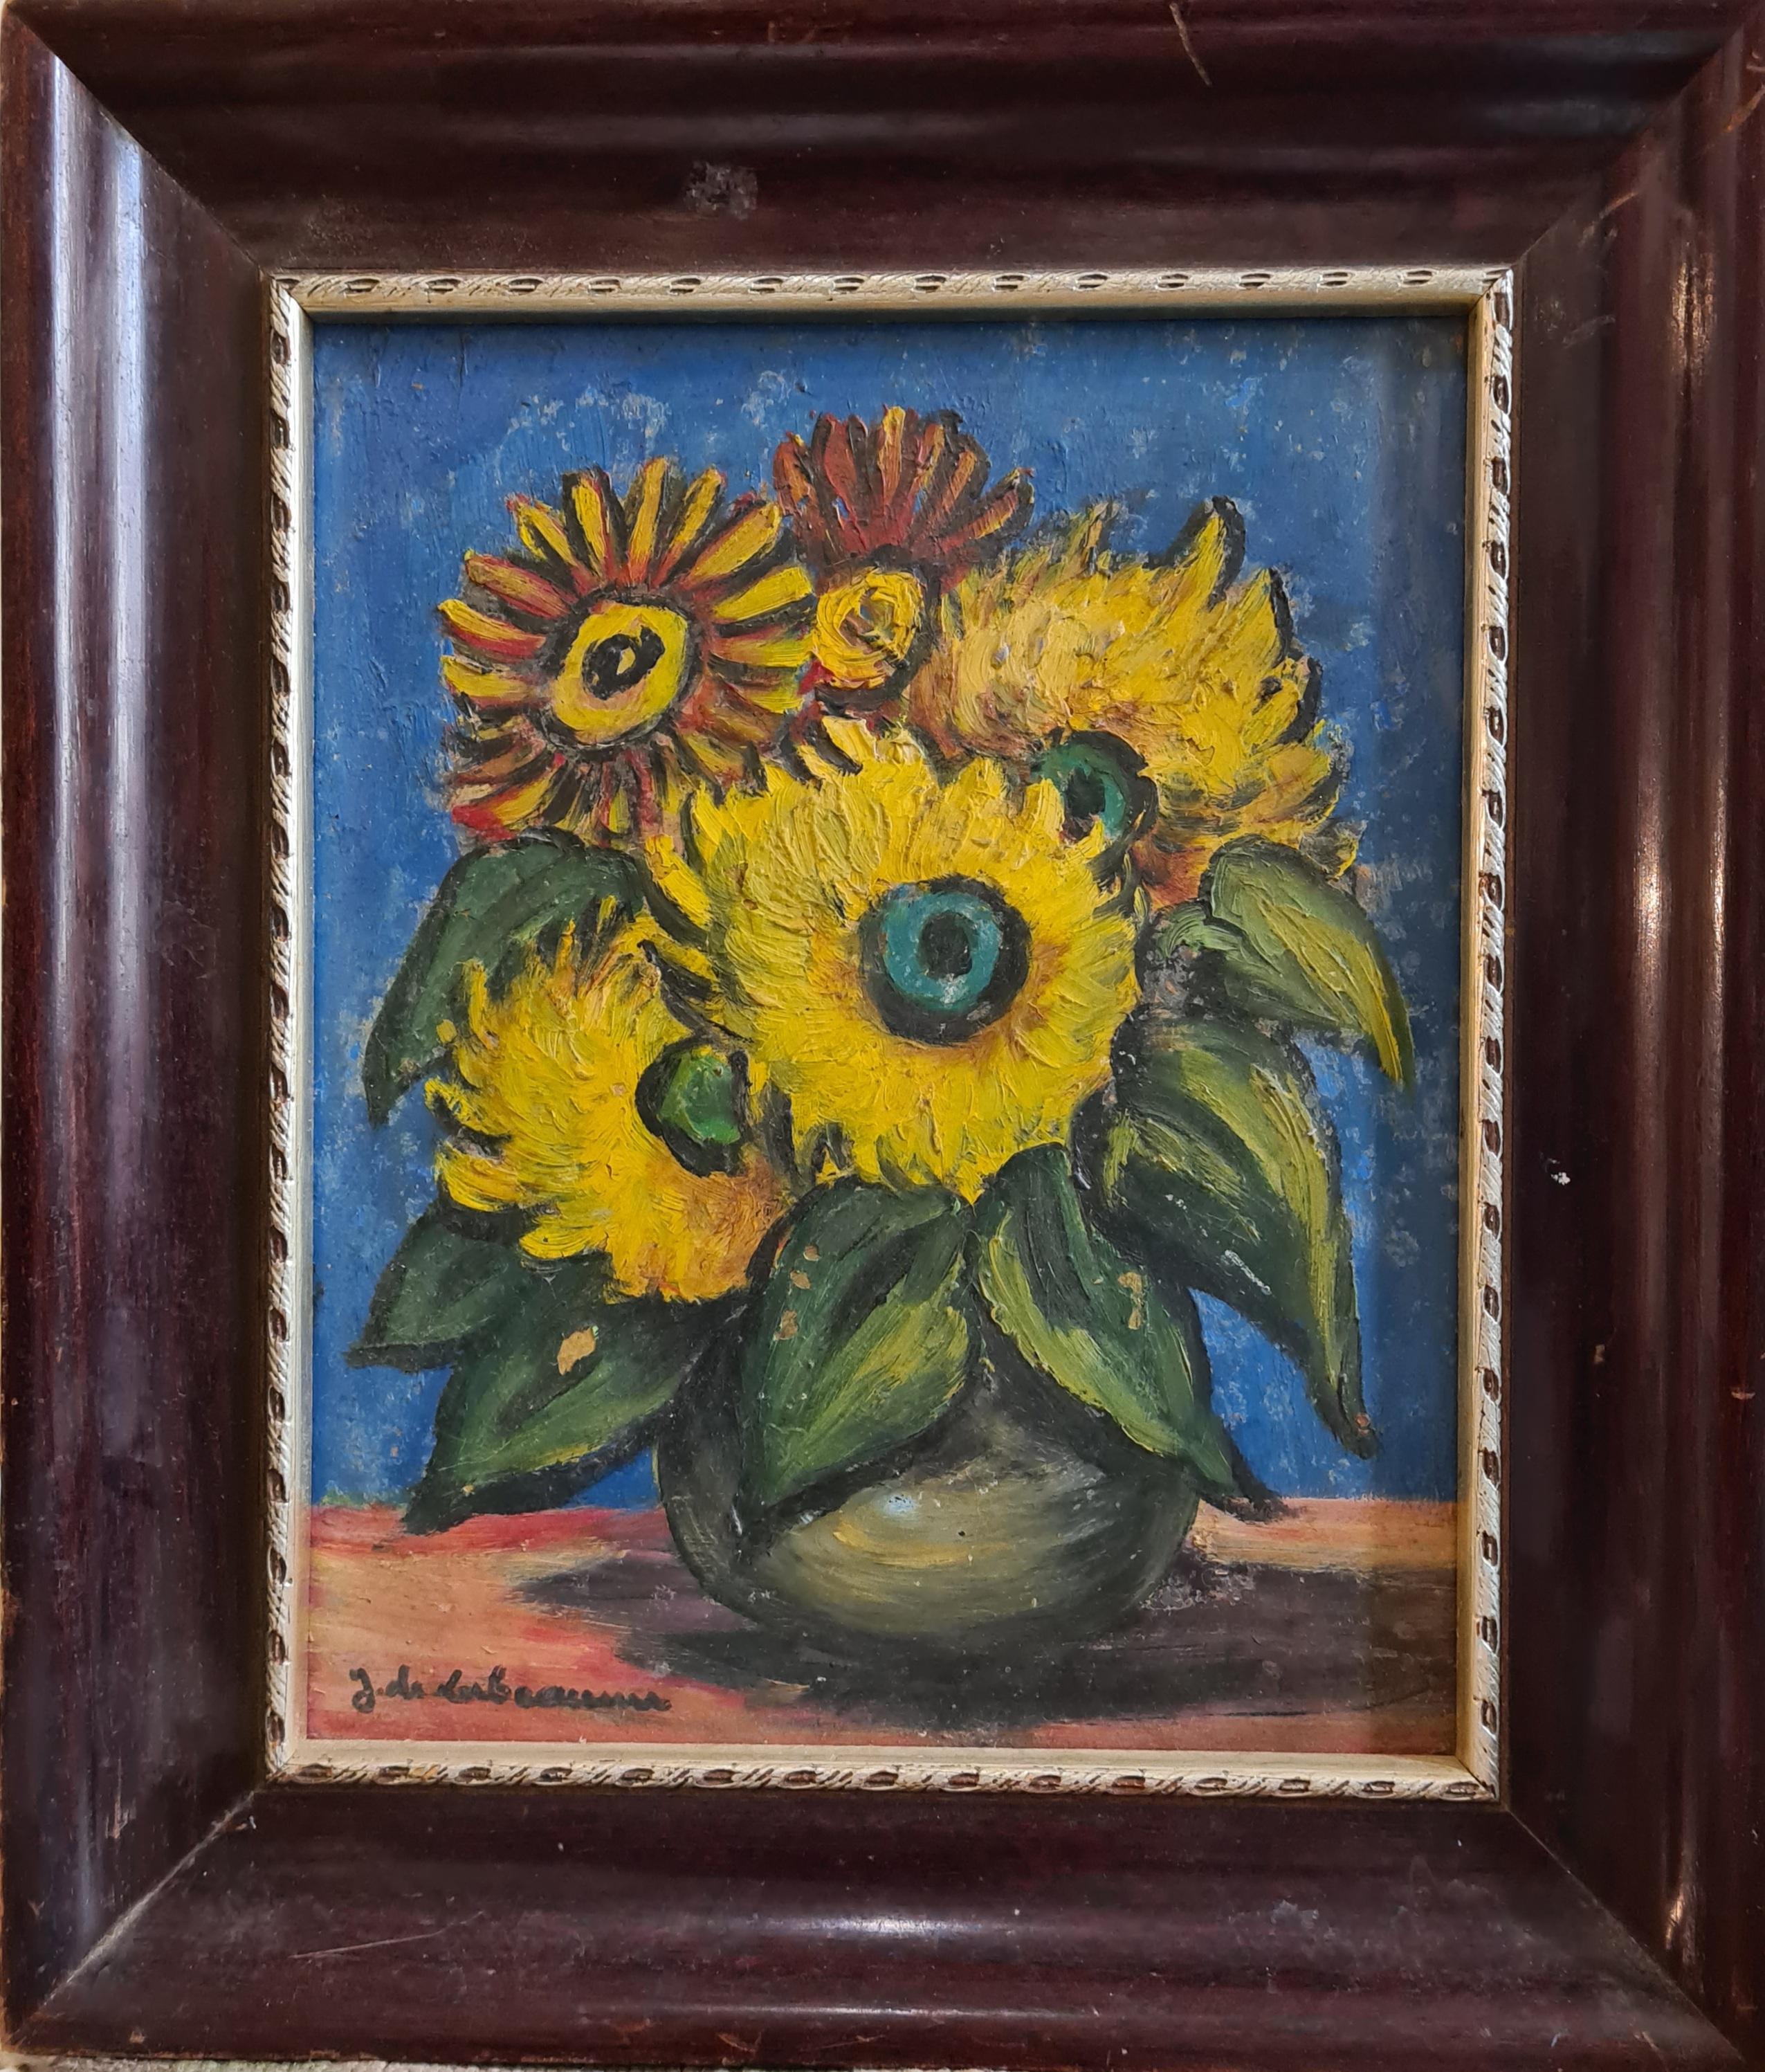 Sunflowers. 'Bateau-Lavoir' Movement Oil on Board, Hommage to Van Gogh. - Painting by Jeanne De Labeaume